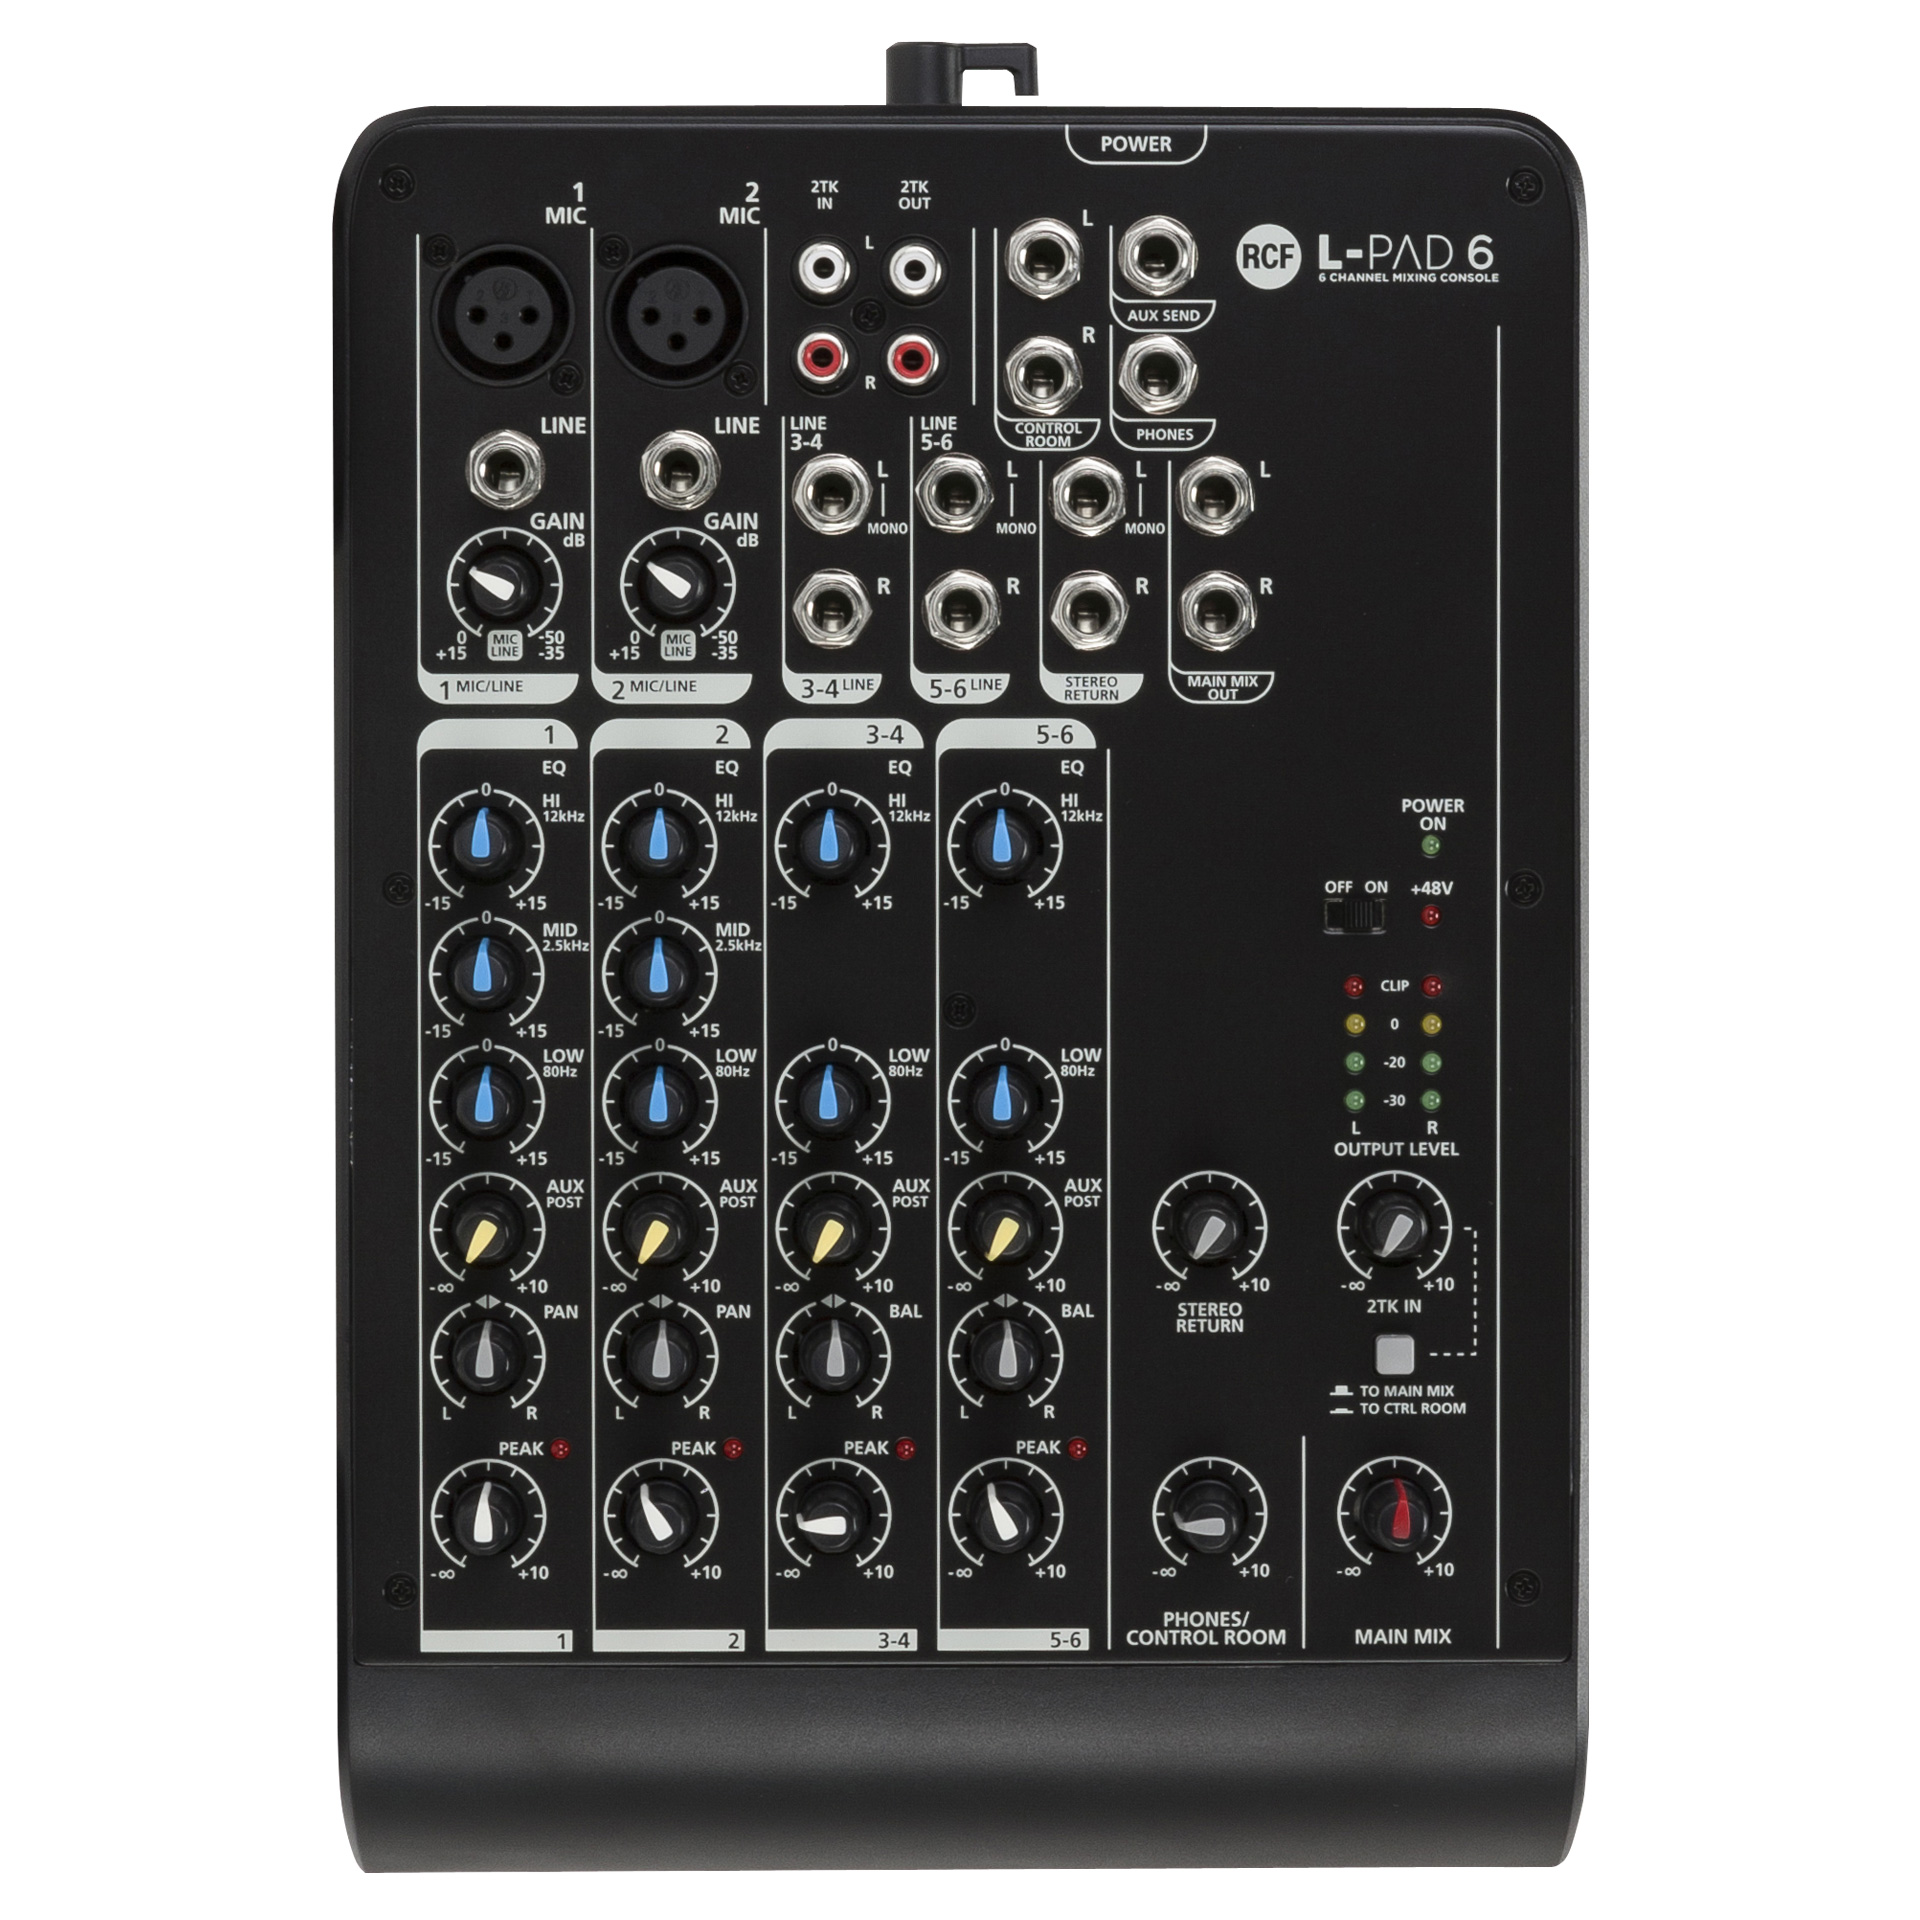 L-PAD 6 6 CHANNEL MIXING CONSOLE